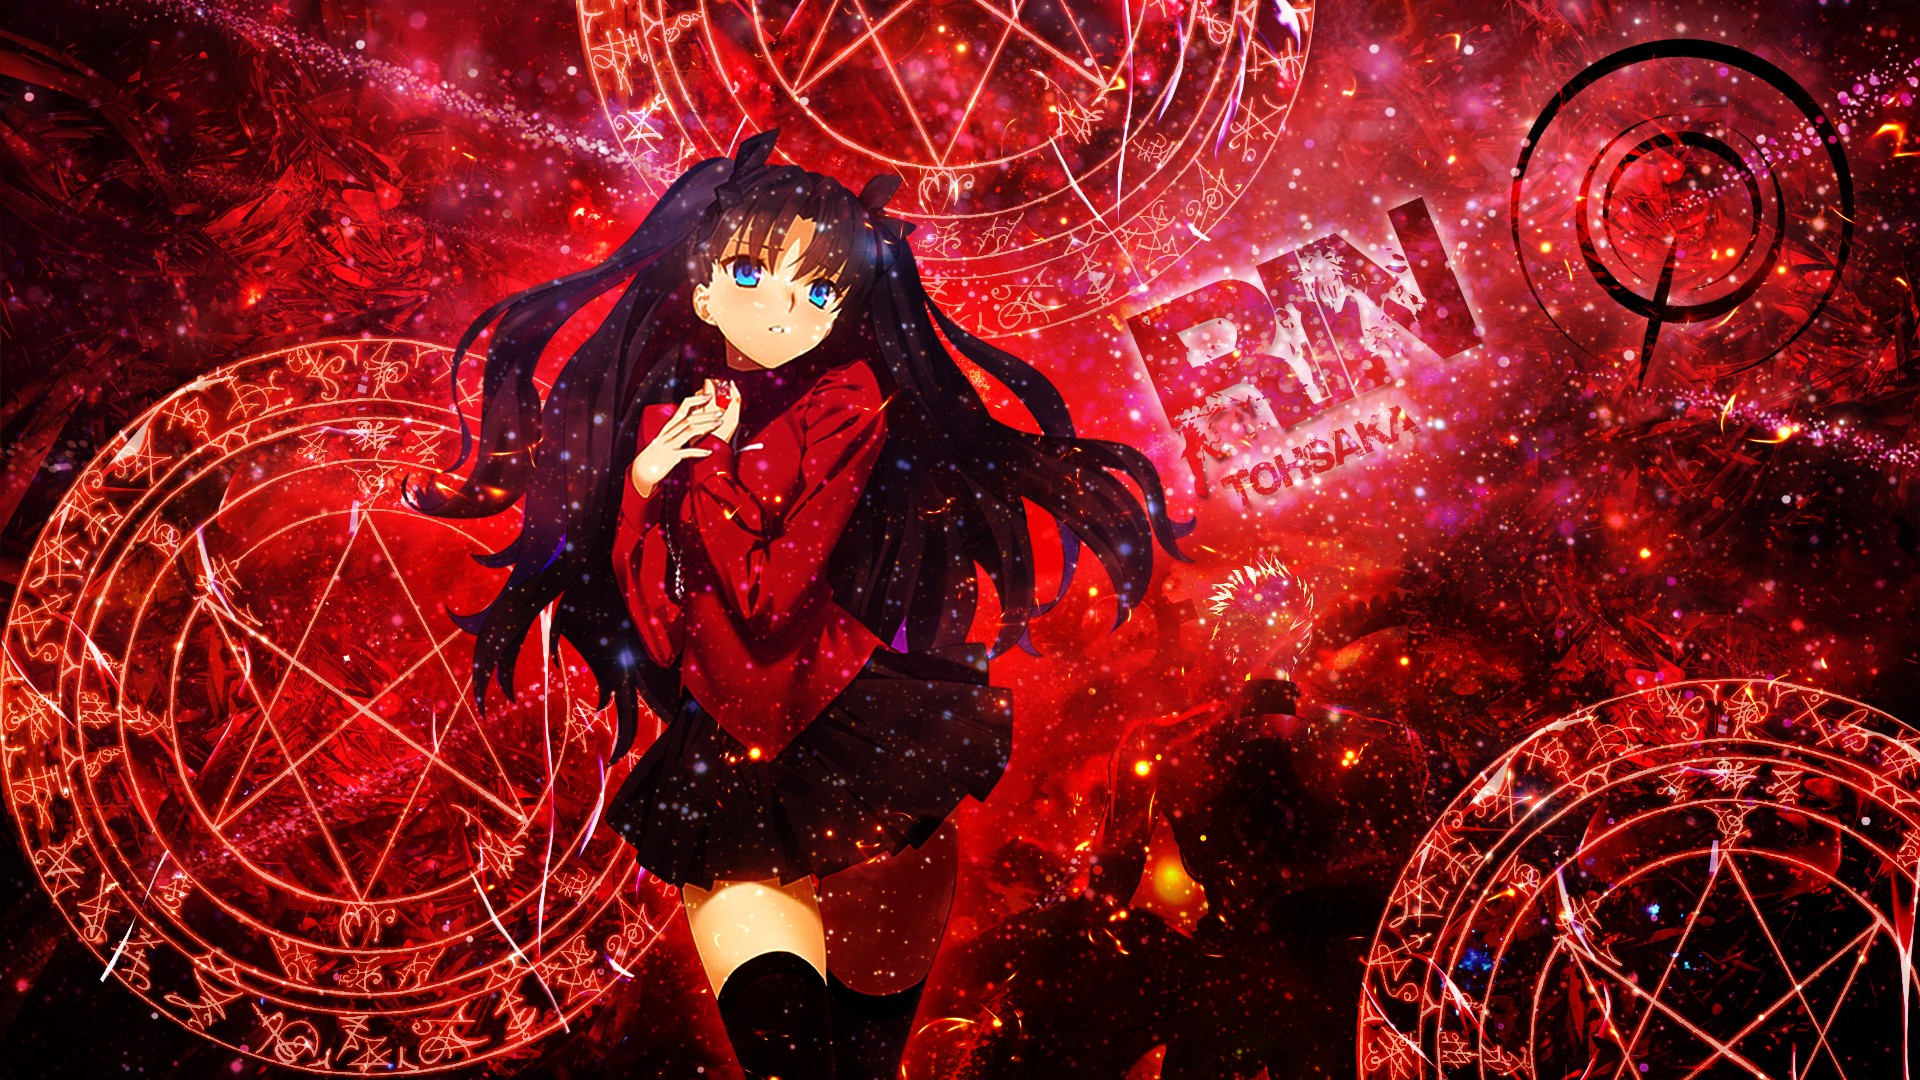 Fate Stay Night Unlimited Blade Works Wallpaper Download Free Cool Hd Backgrounds For Desktop And Mobile Devices In Any Resolution Desktop Android Iphone Ipad 19x1080 480x800 7x1280 19x10 Etc Wallpapertag